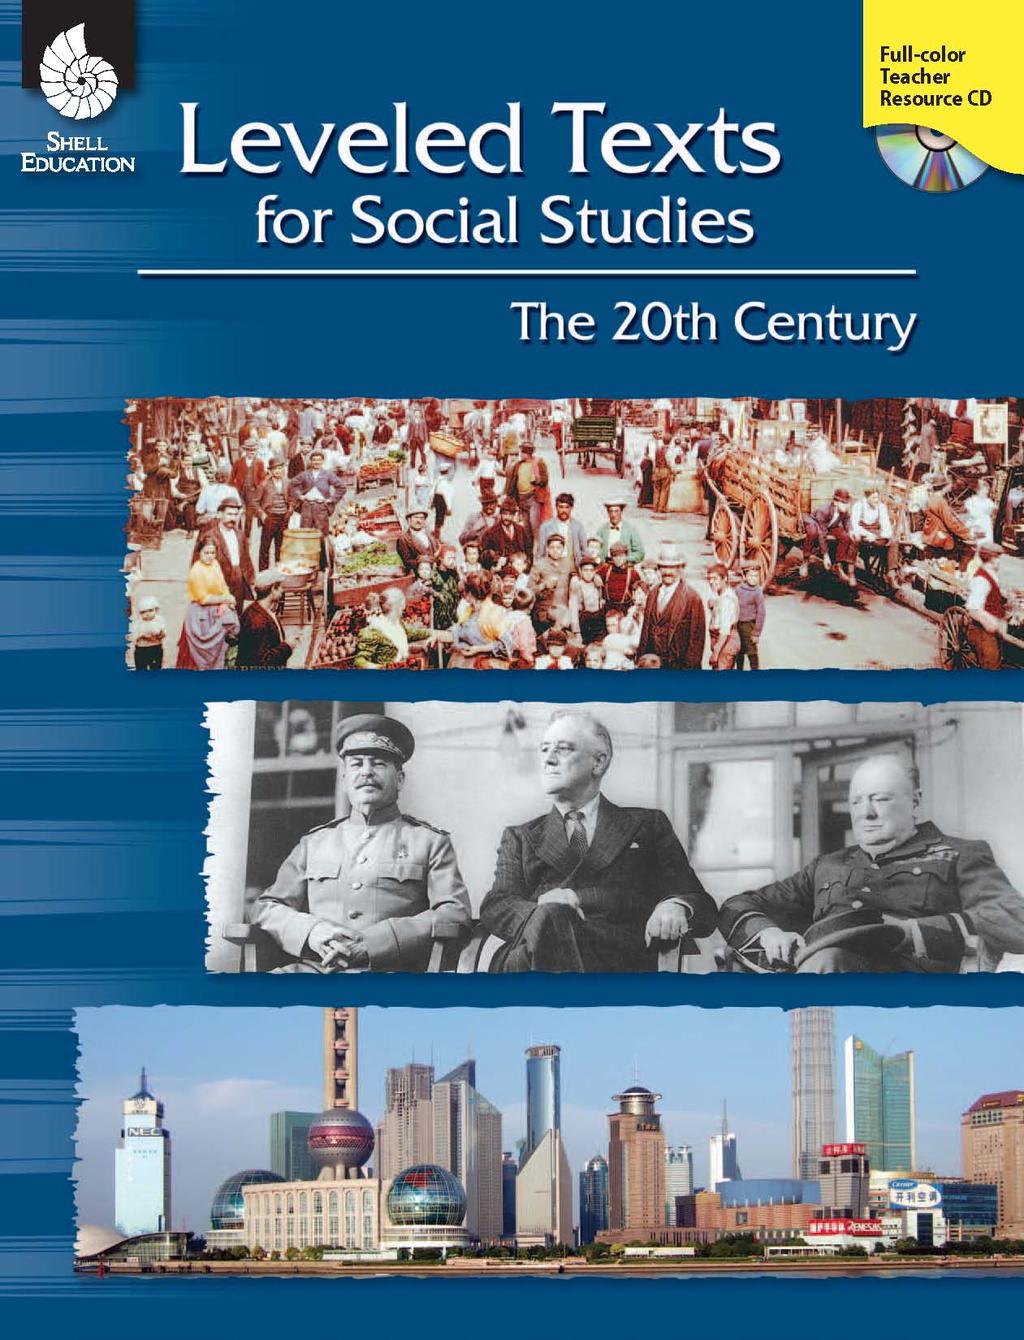 Sample Pages from Leveled Texts for Social Studies: The 20th Century The following sample pages are included in this download: Table of Contents Readability Chart Sample Passage For correlations to